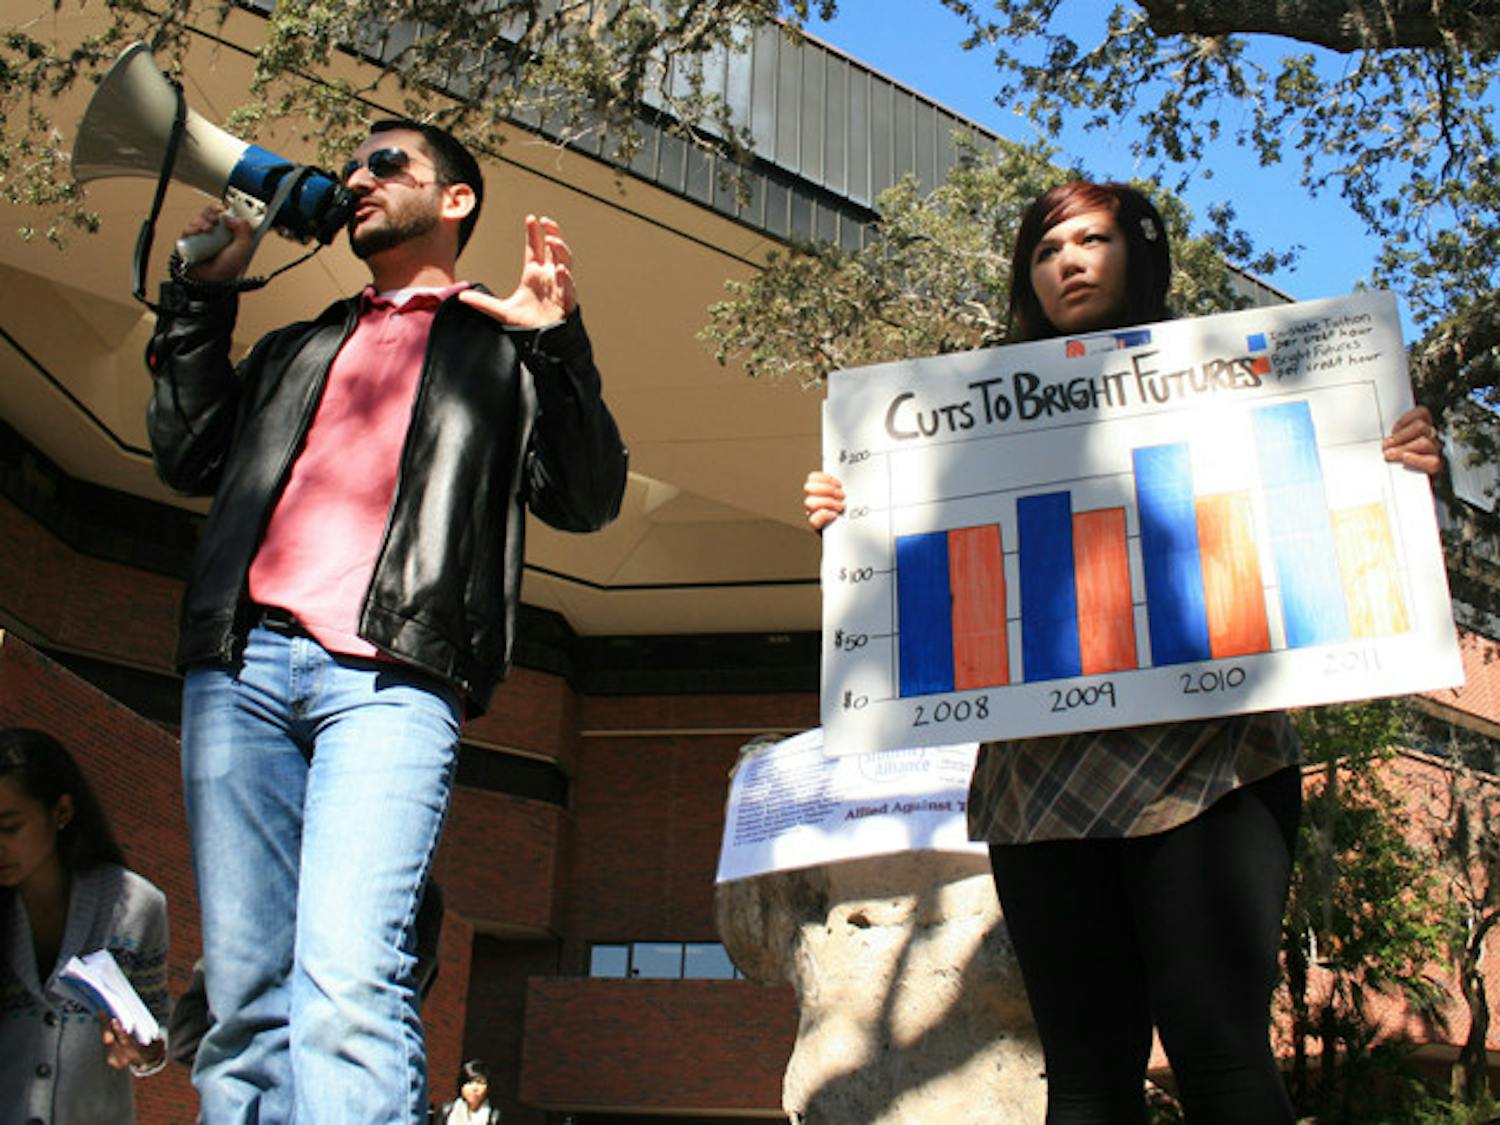 Gator Student Alliance members Robbey Hayes, a 20-year-old anthropology junior, and Marie Dino, a 20-year-old education sophomore, educate UF students passing through Turlington Plaza on Wednesday afternoon about the cuts that the state is making in education and how it will affect future tuition.